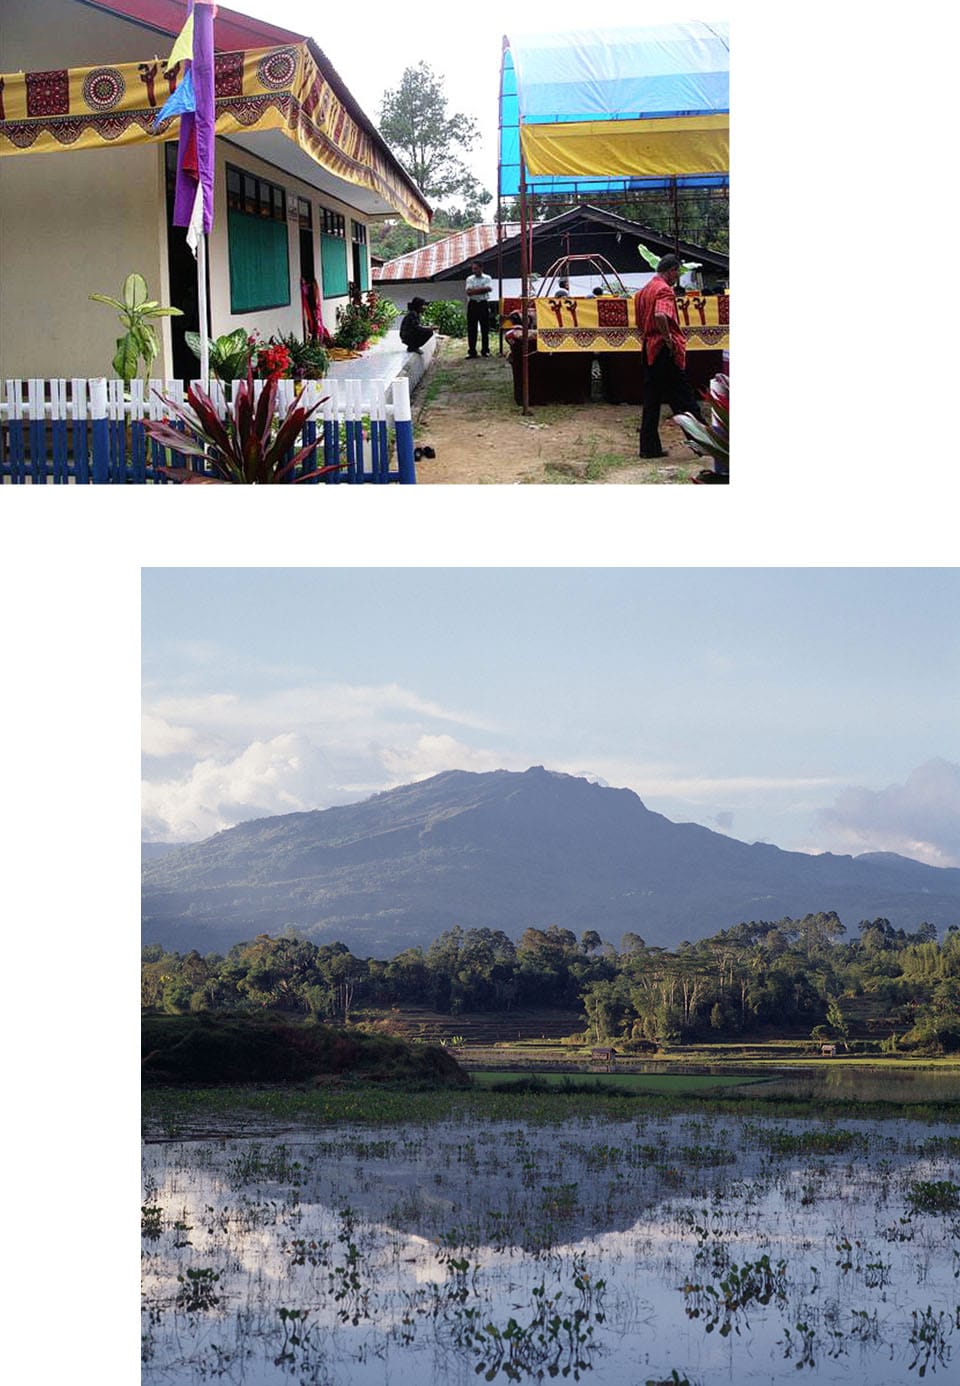 Collage of the exterior of a building with some people in the background and a landscape photo with a mountain, trees, and a shallow body of water